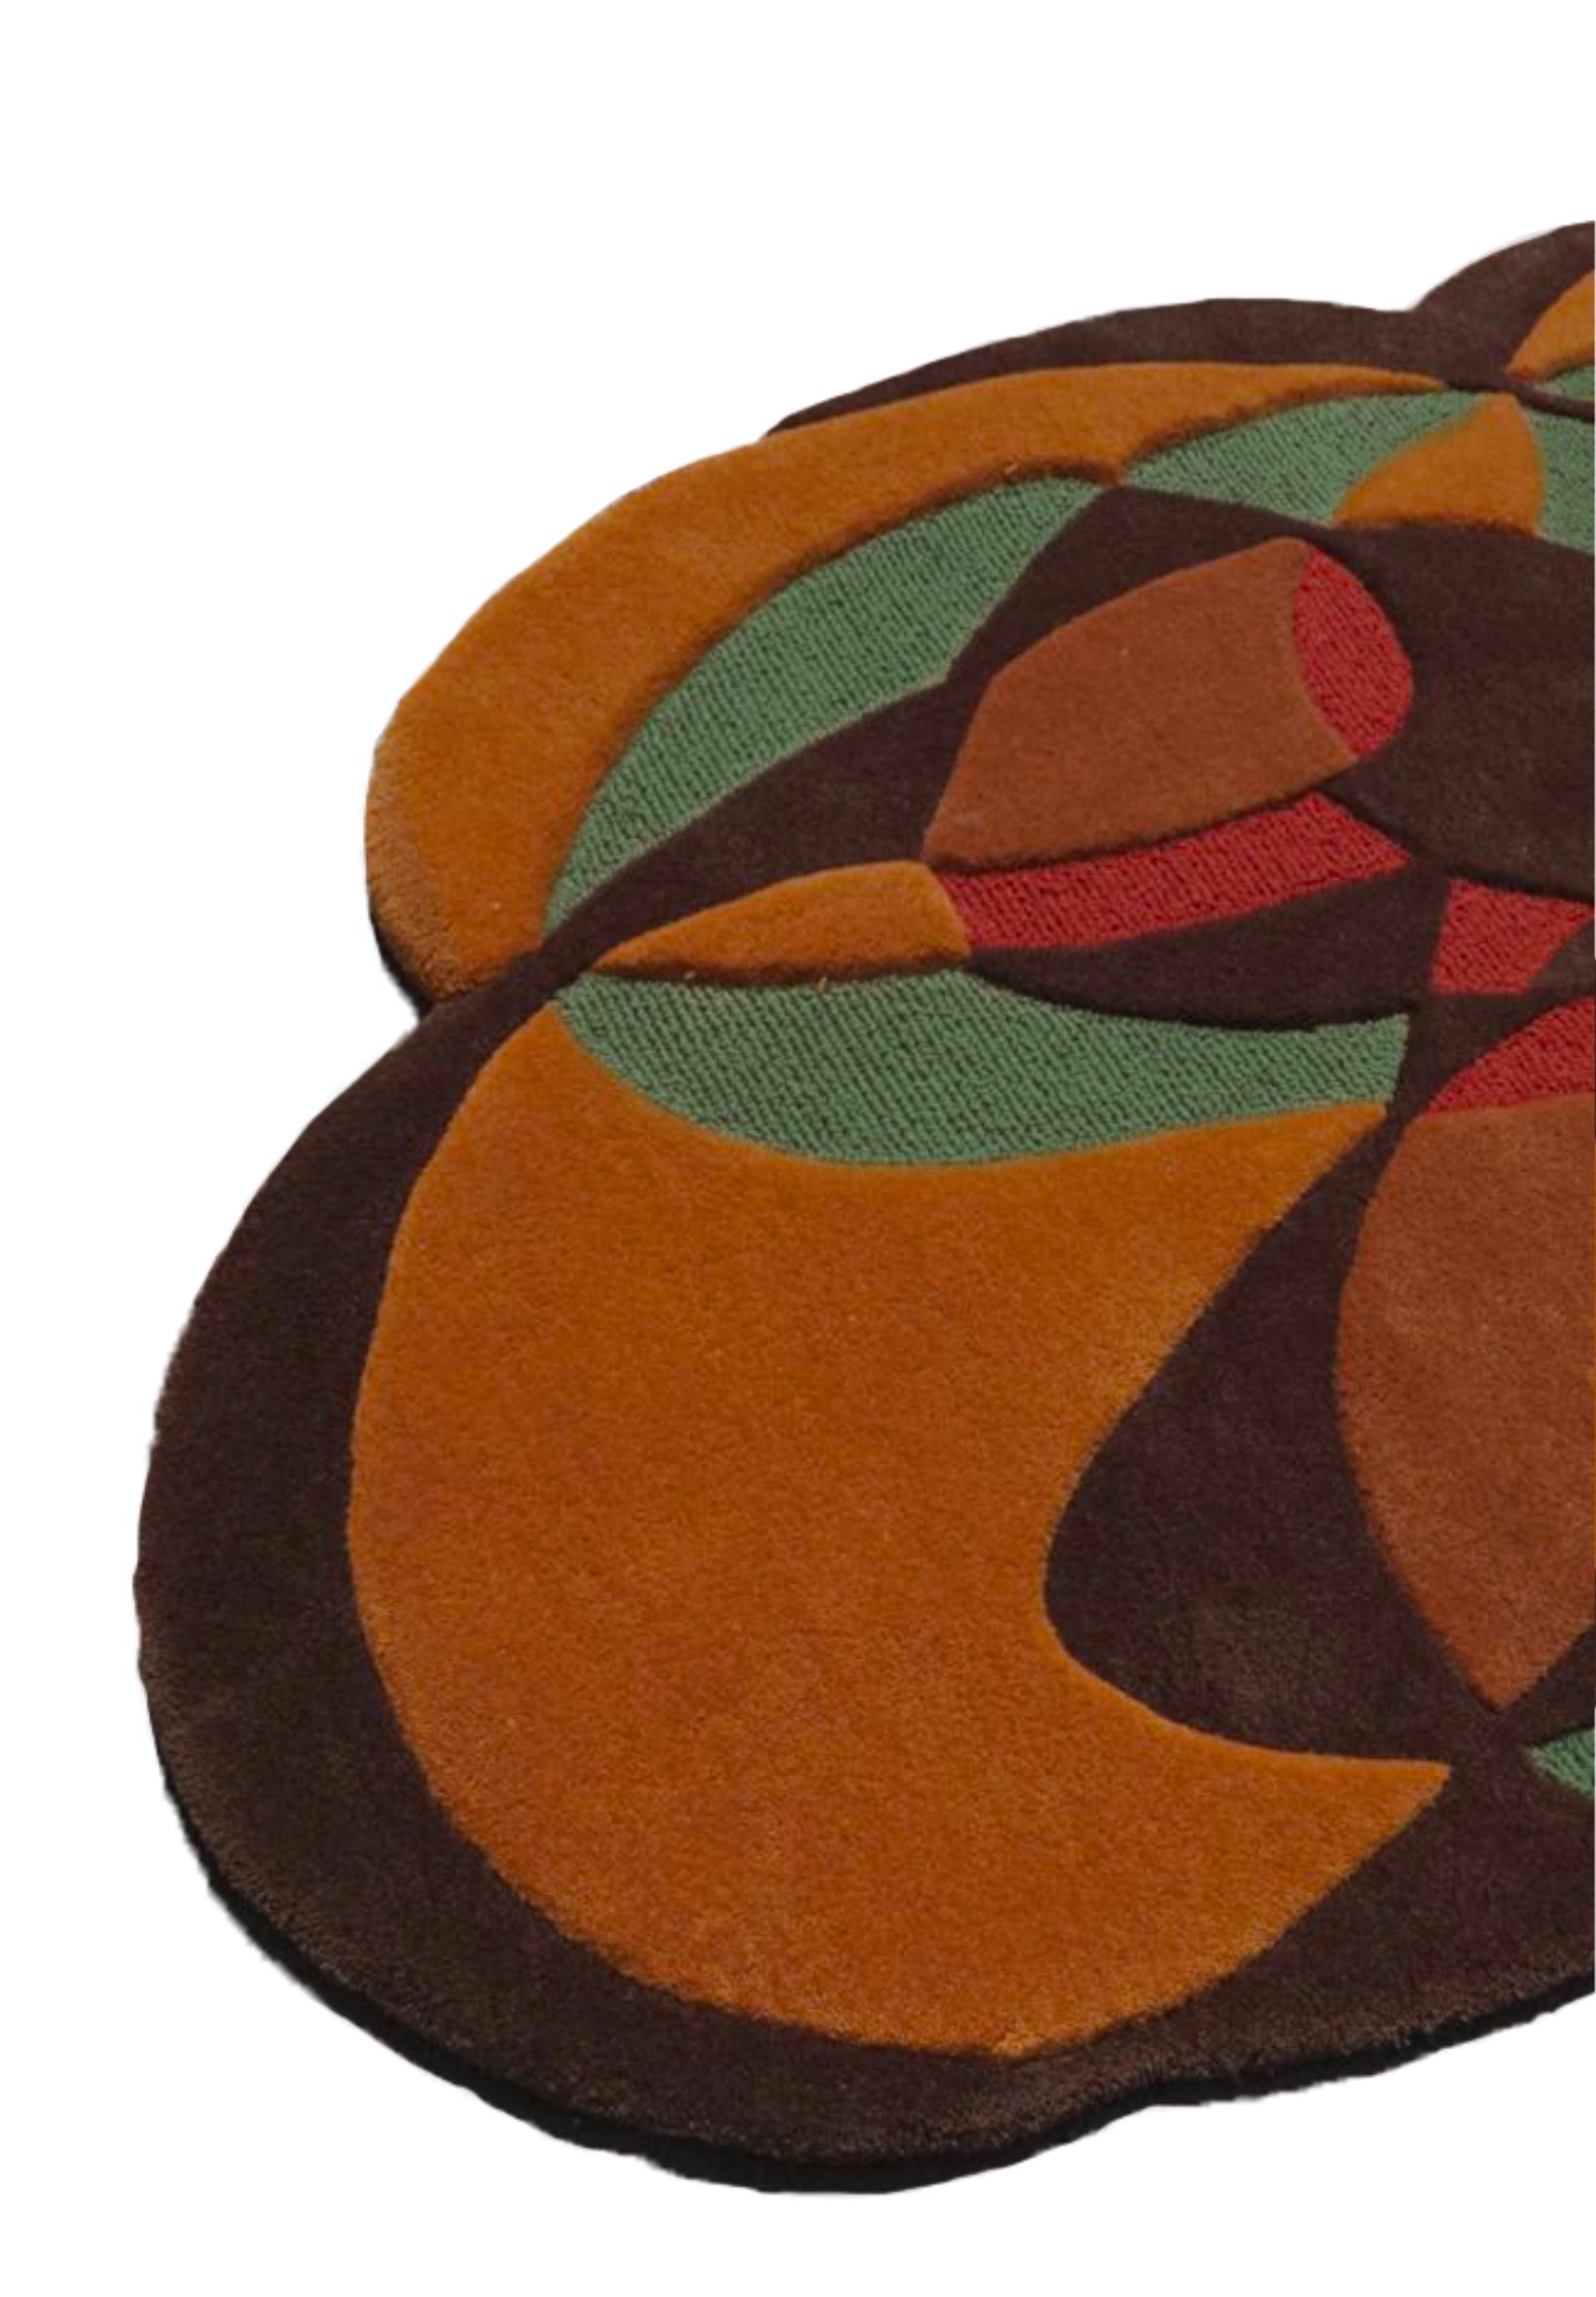 Indonesian Irregular Shape Midcentury Style Hand Tufted Rug 'Honey Pie' by RAG Home For Sale